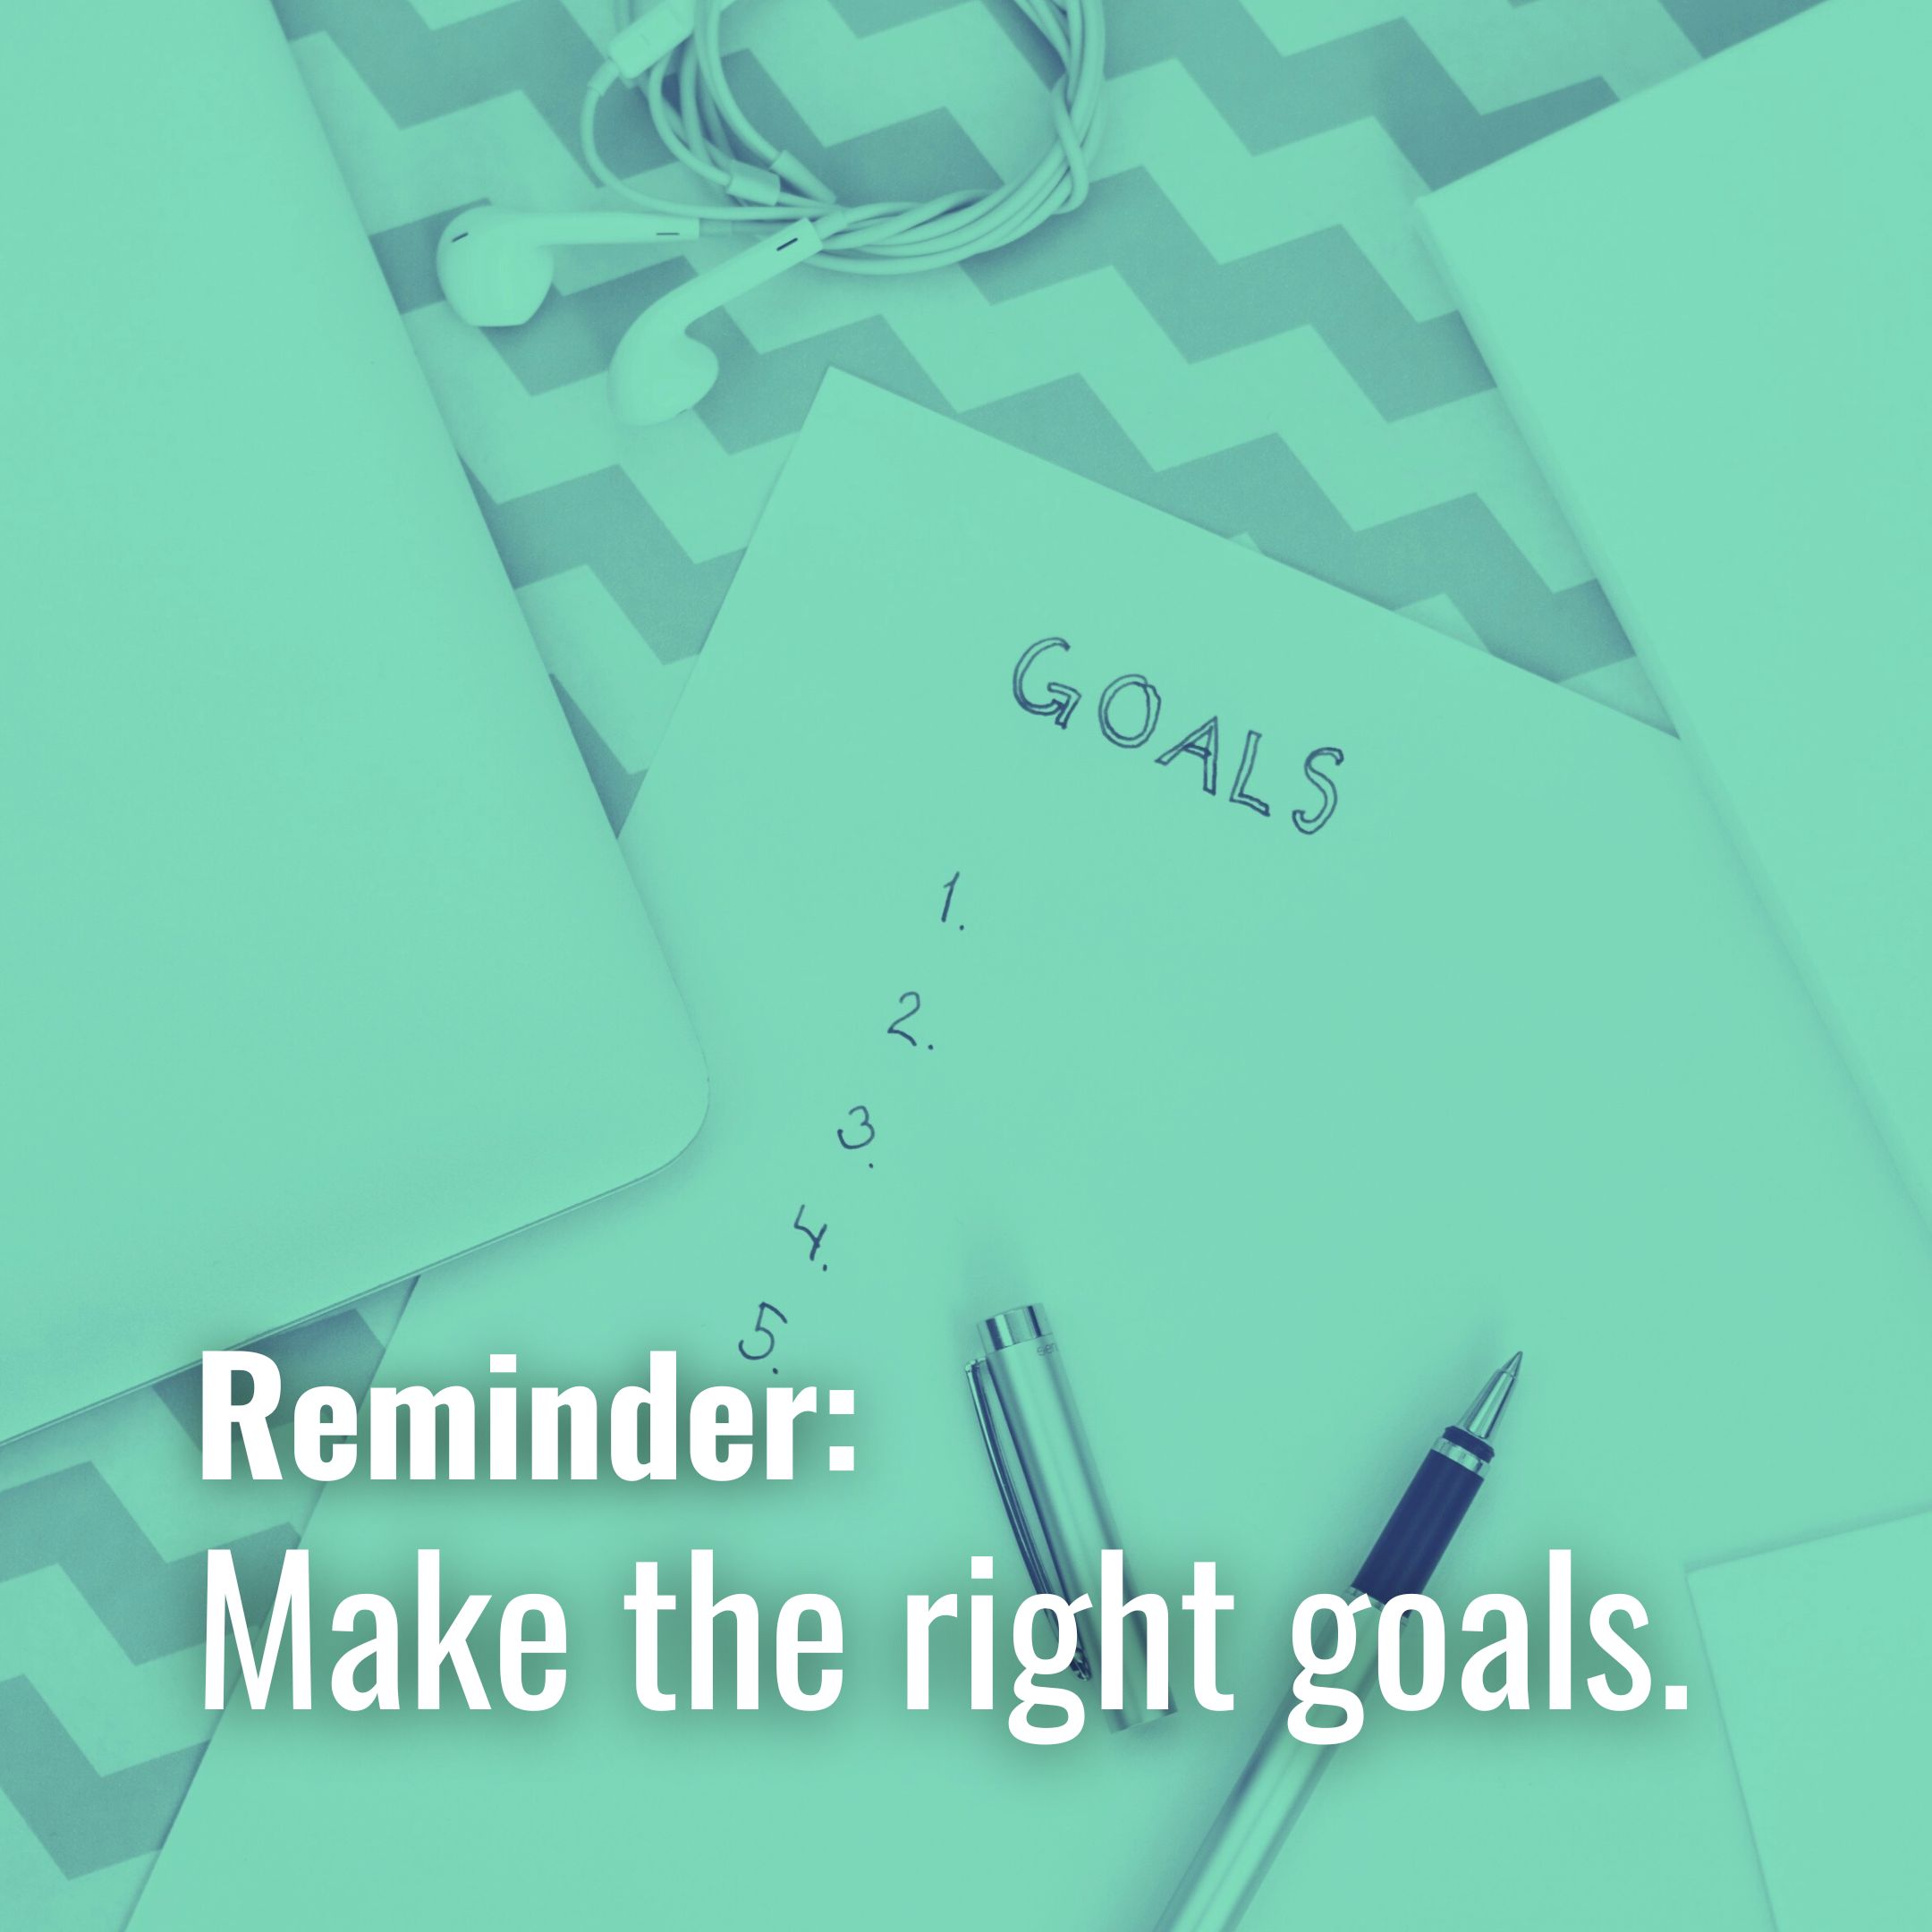 Make the right goals.